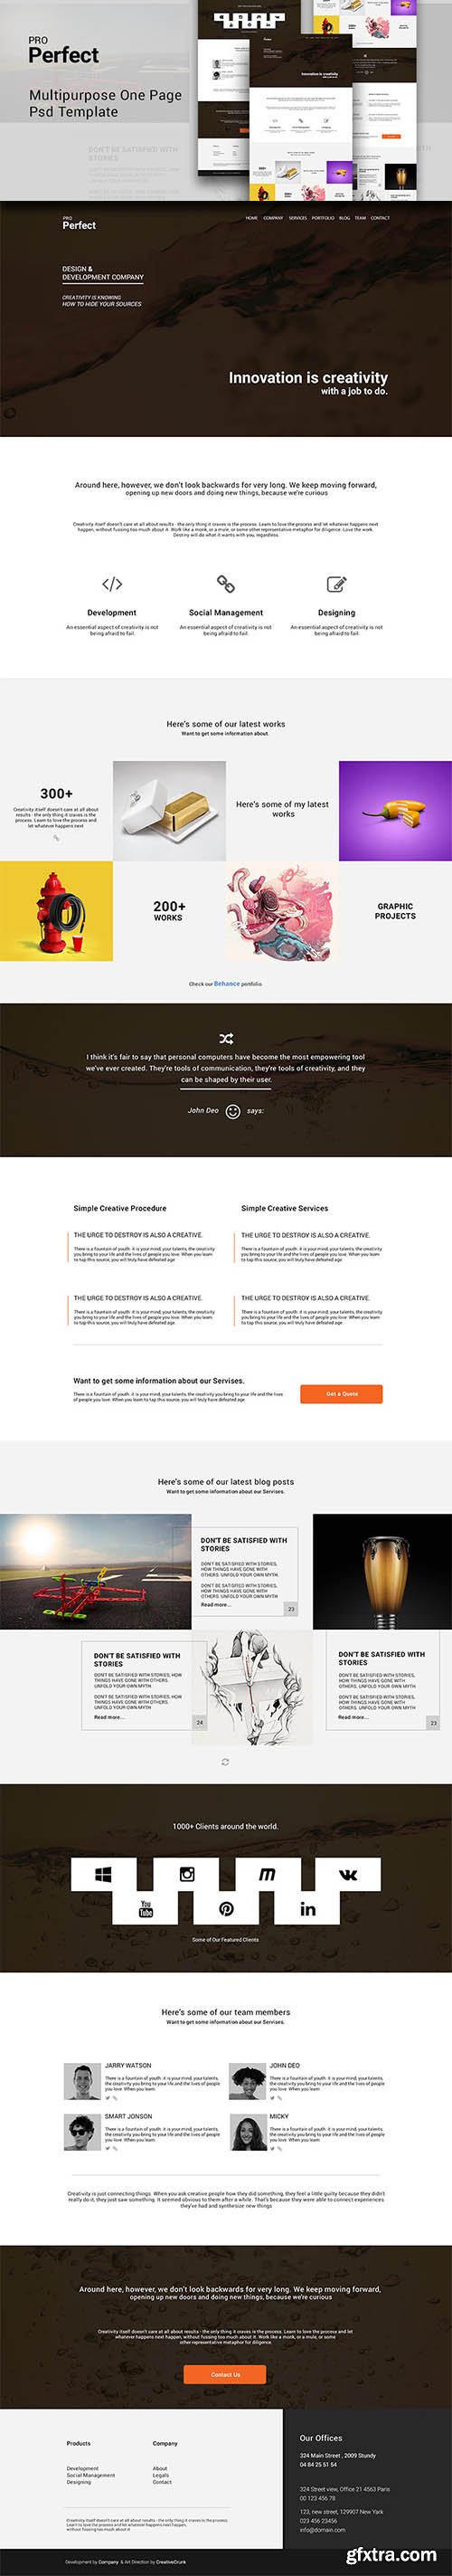 PSD Web Template - ProPerfect - Multipurpose One Page Theme